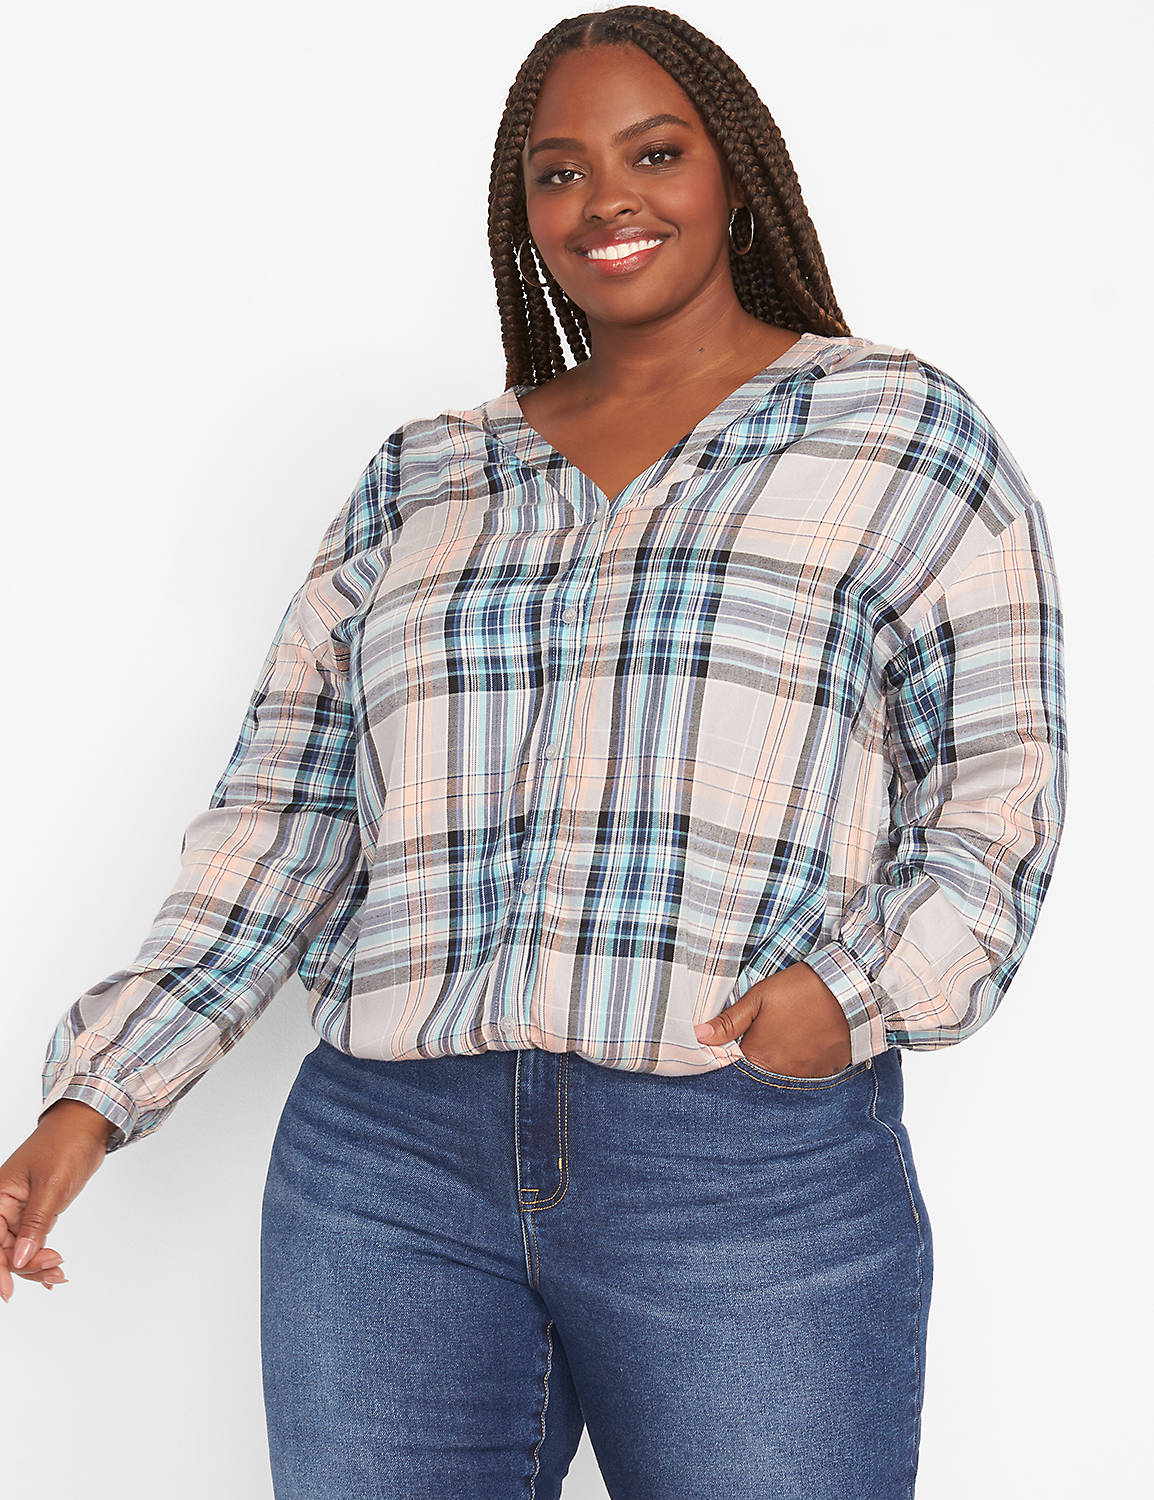 Long Sleeve V Neck Button Front Plaid Control Volume Top 1124020:LBH21214_AmyPlaid_CW19:10/12 Product Image 1